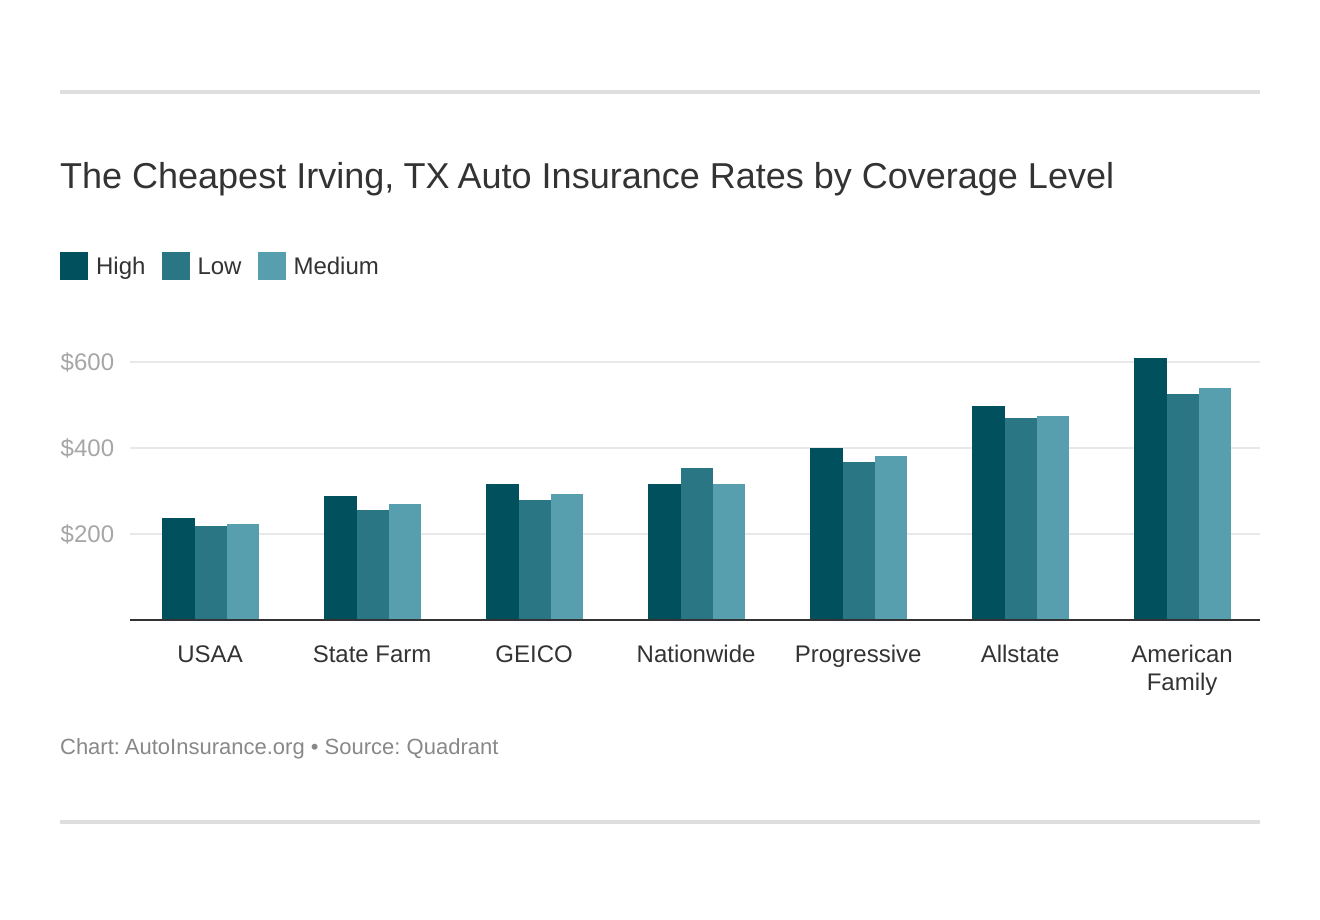 The Cheapest Irving, TX Auto Insurance Rates by Coverage Level